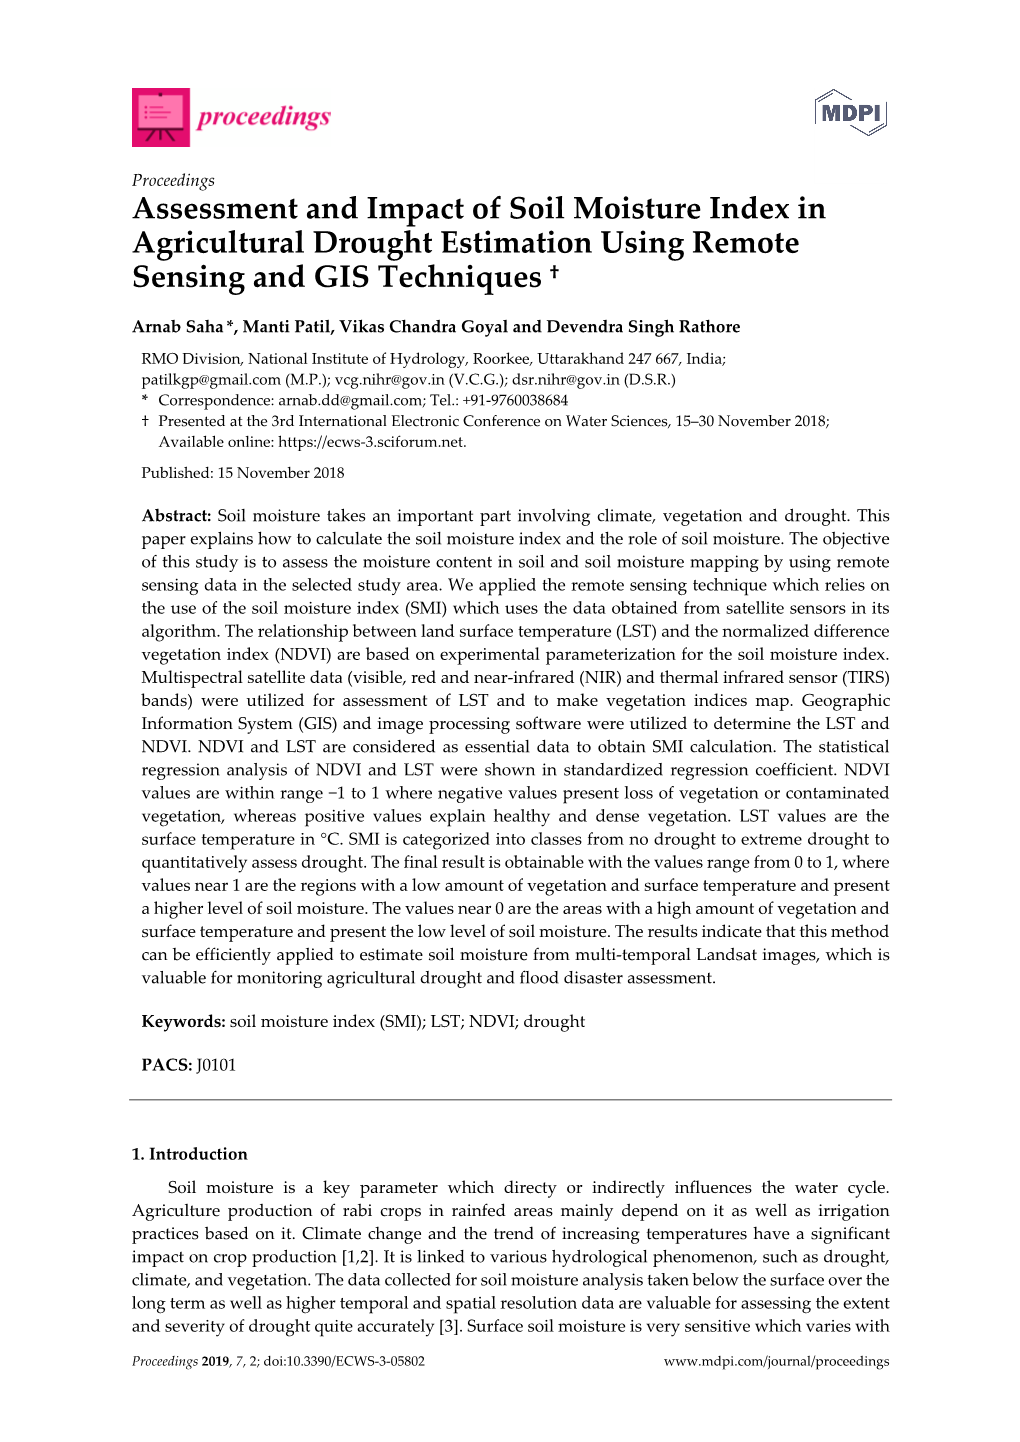 Assessment and Impact of Soil Moisture Index in Agricultural Drought Estimation Using Remote Sensing and GIS Techniques †